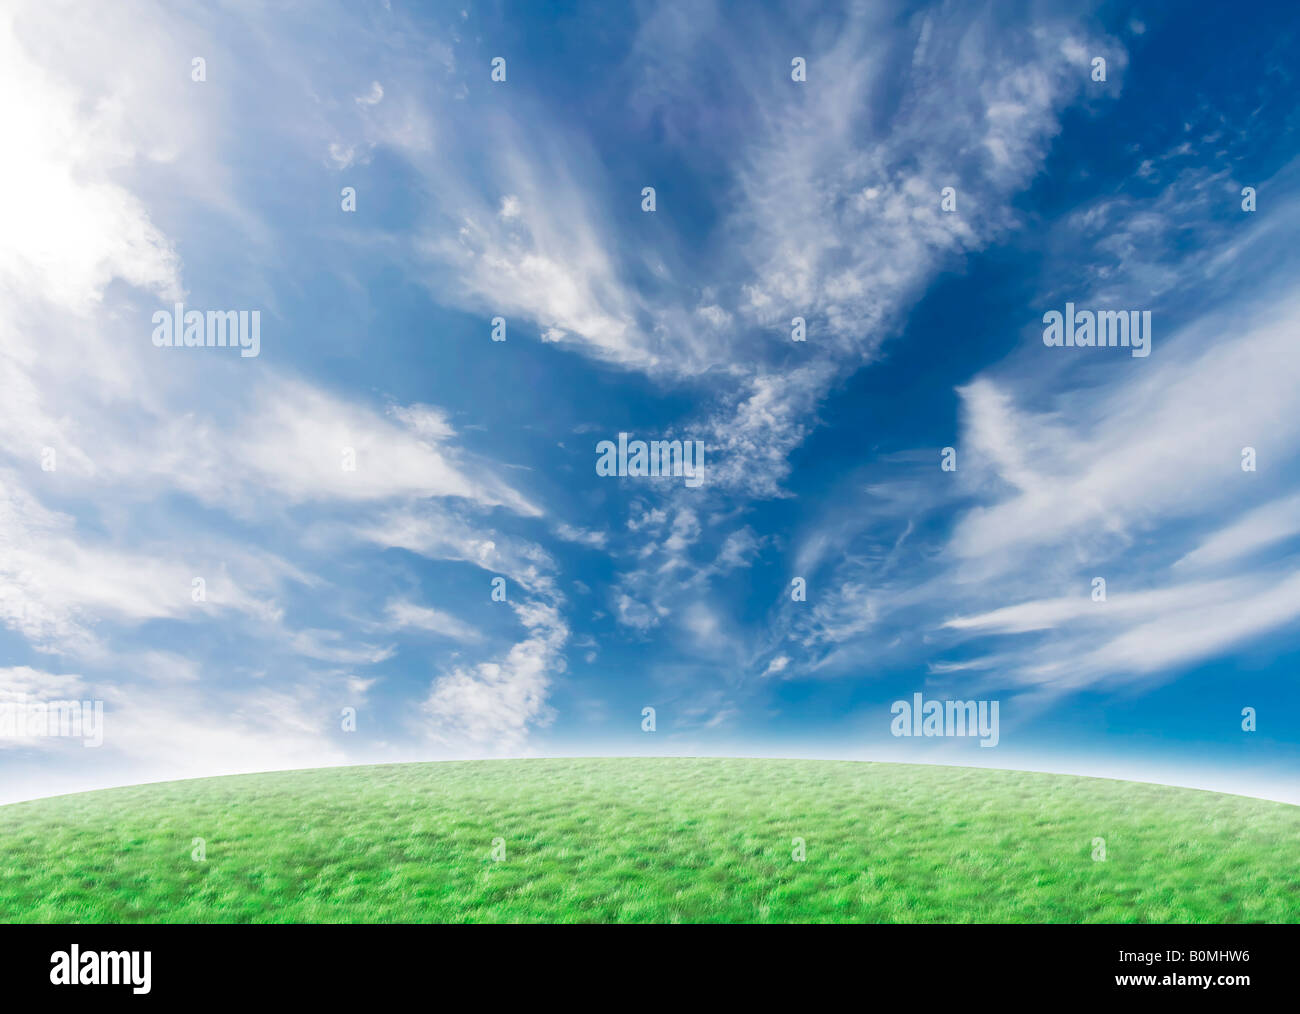 Beautiful nature background with green grass and blue vivid sky with clouds Stock Photo